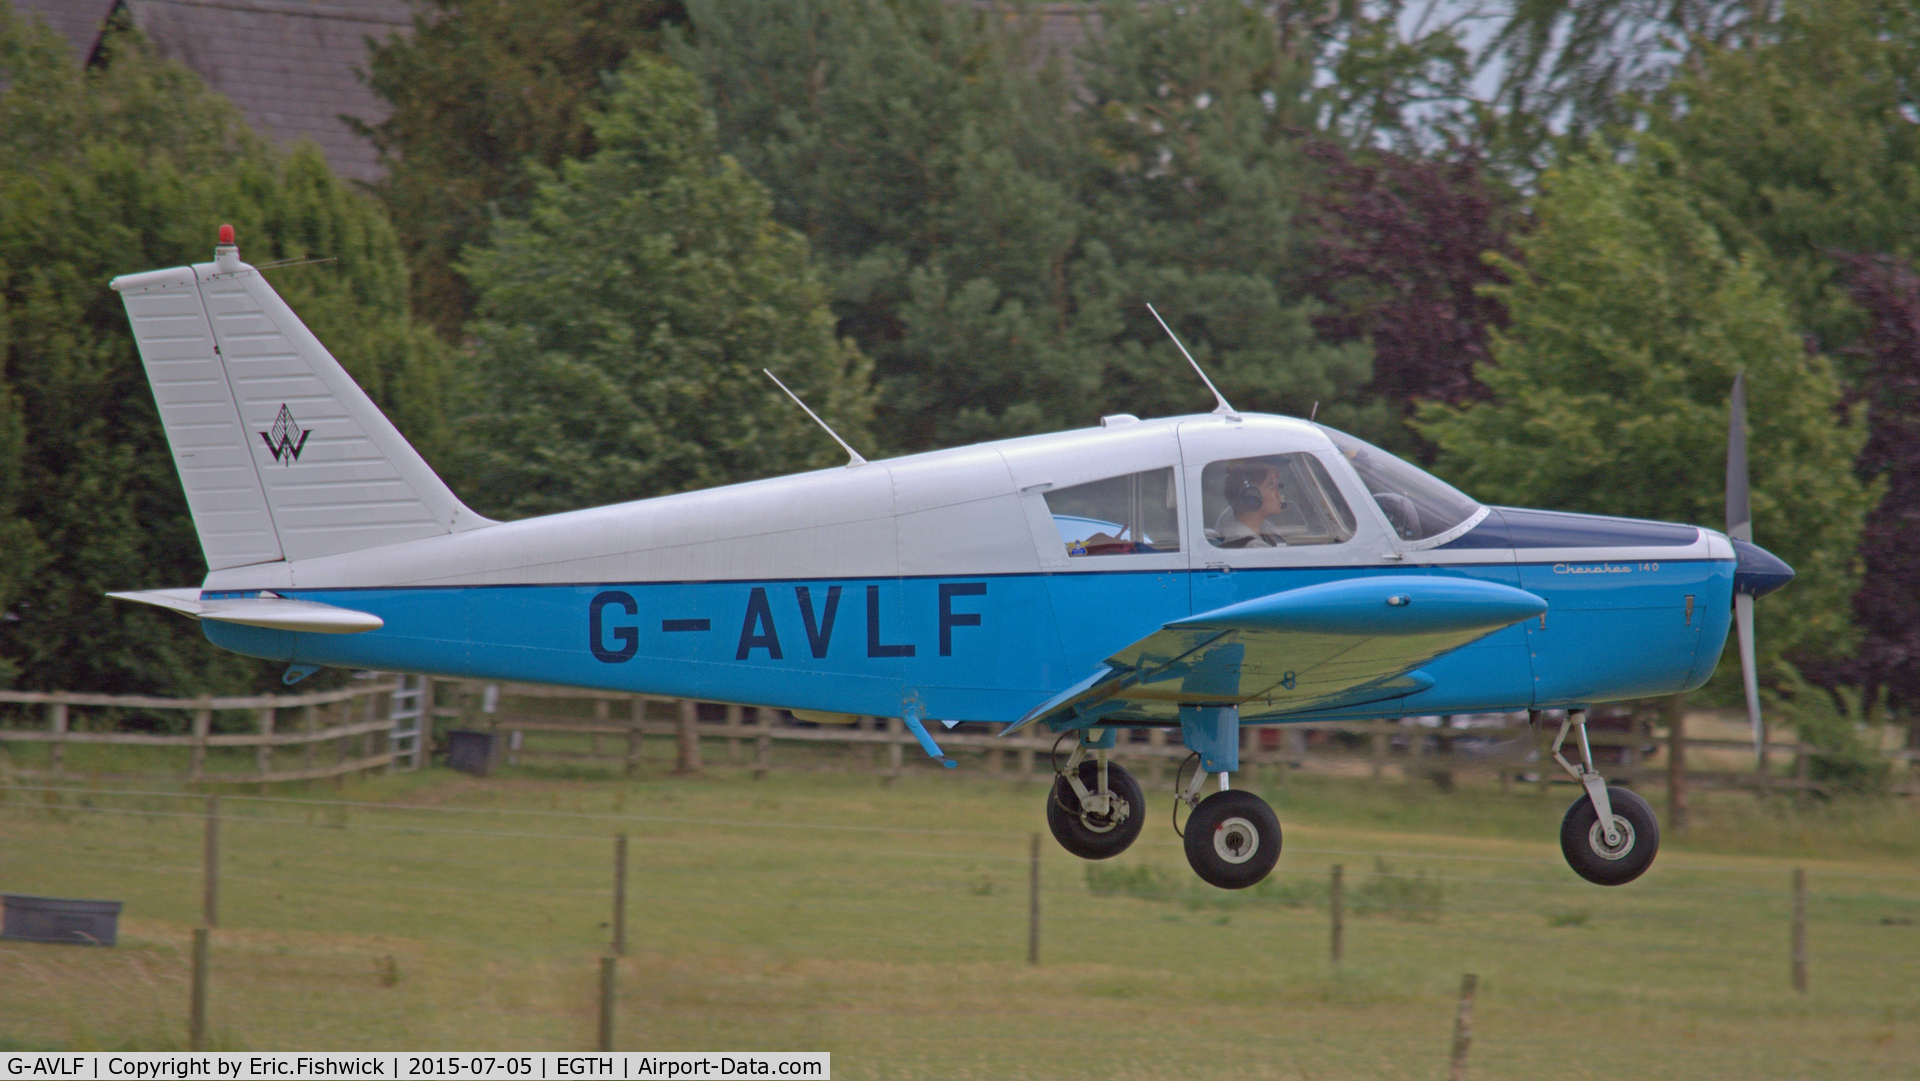 G-AVLF, 1967 Piper PA-28-140 Cherokee C/N 28-23268, 42. G-AVLF departing the Shuttleworth Military Pagent Airshow, July 2015.